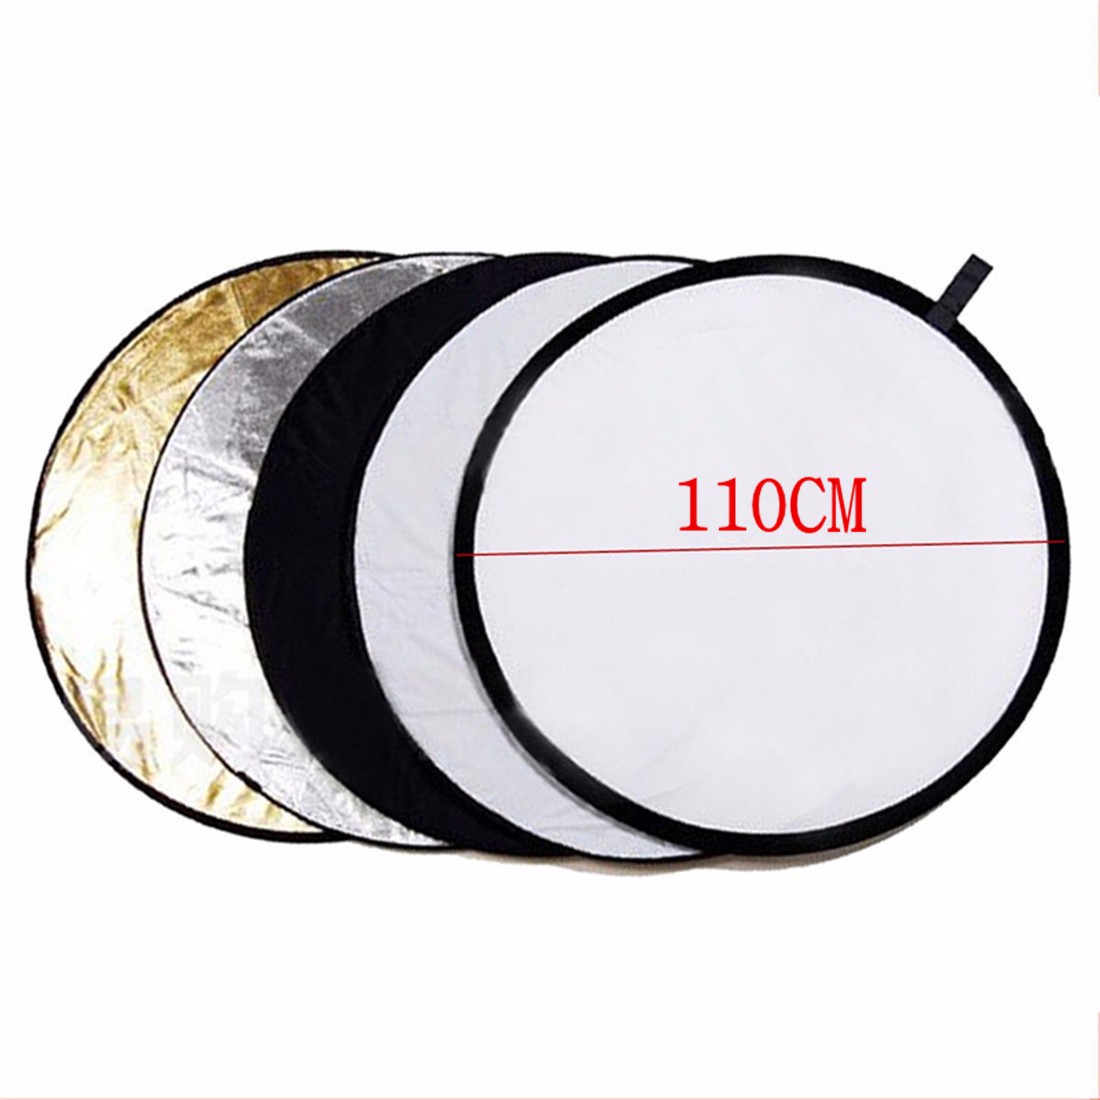 Mohoo-110cm-Round-Shape-5-in1-Studio-Photo-Multi-Disc-Collapsible-Light-Reflector-Photography-1974942-2